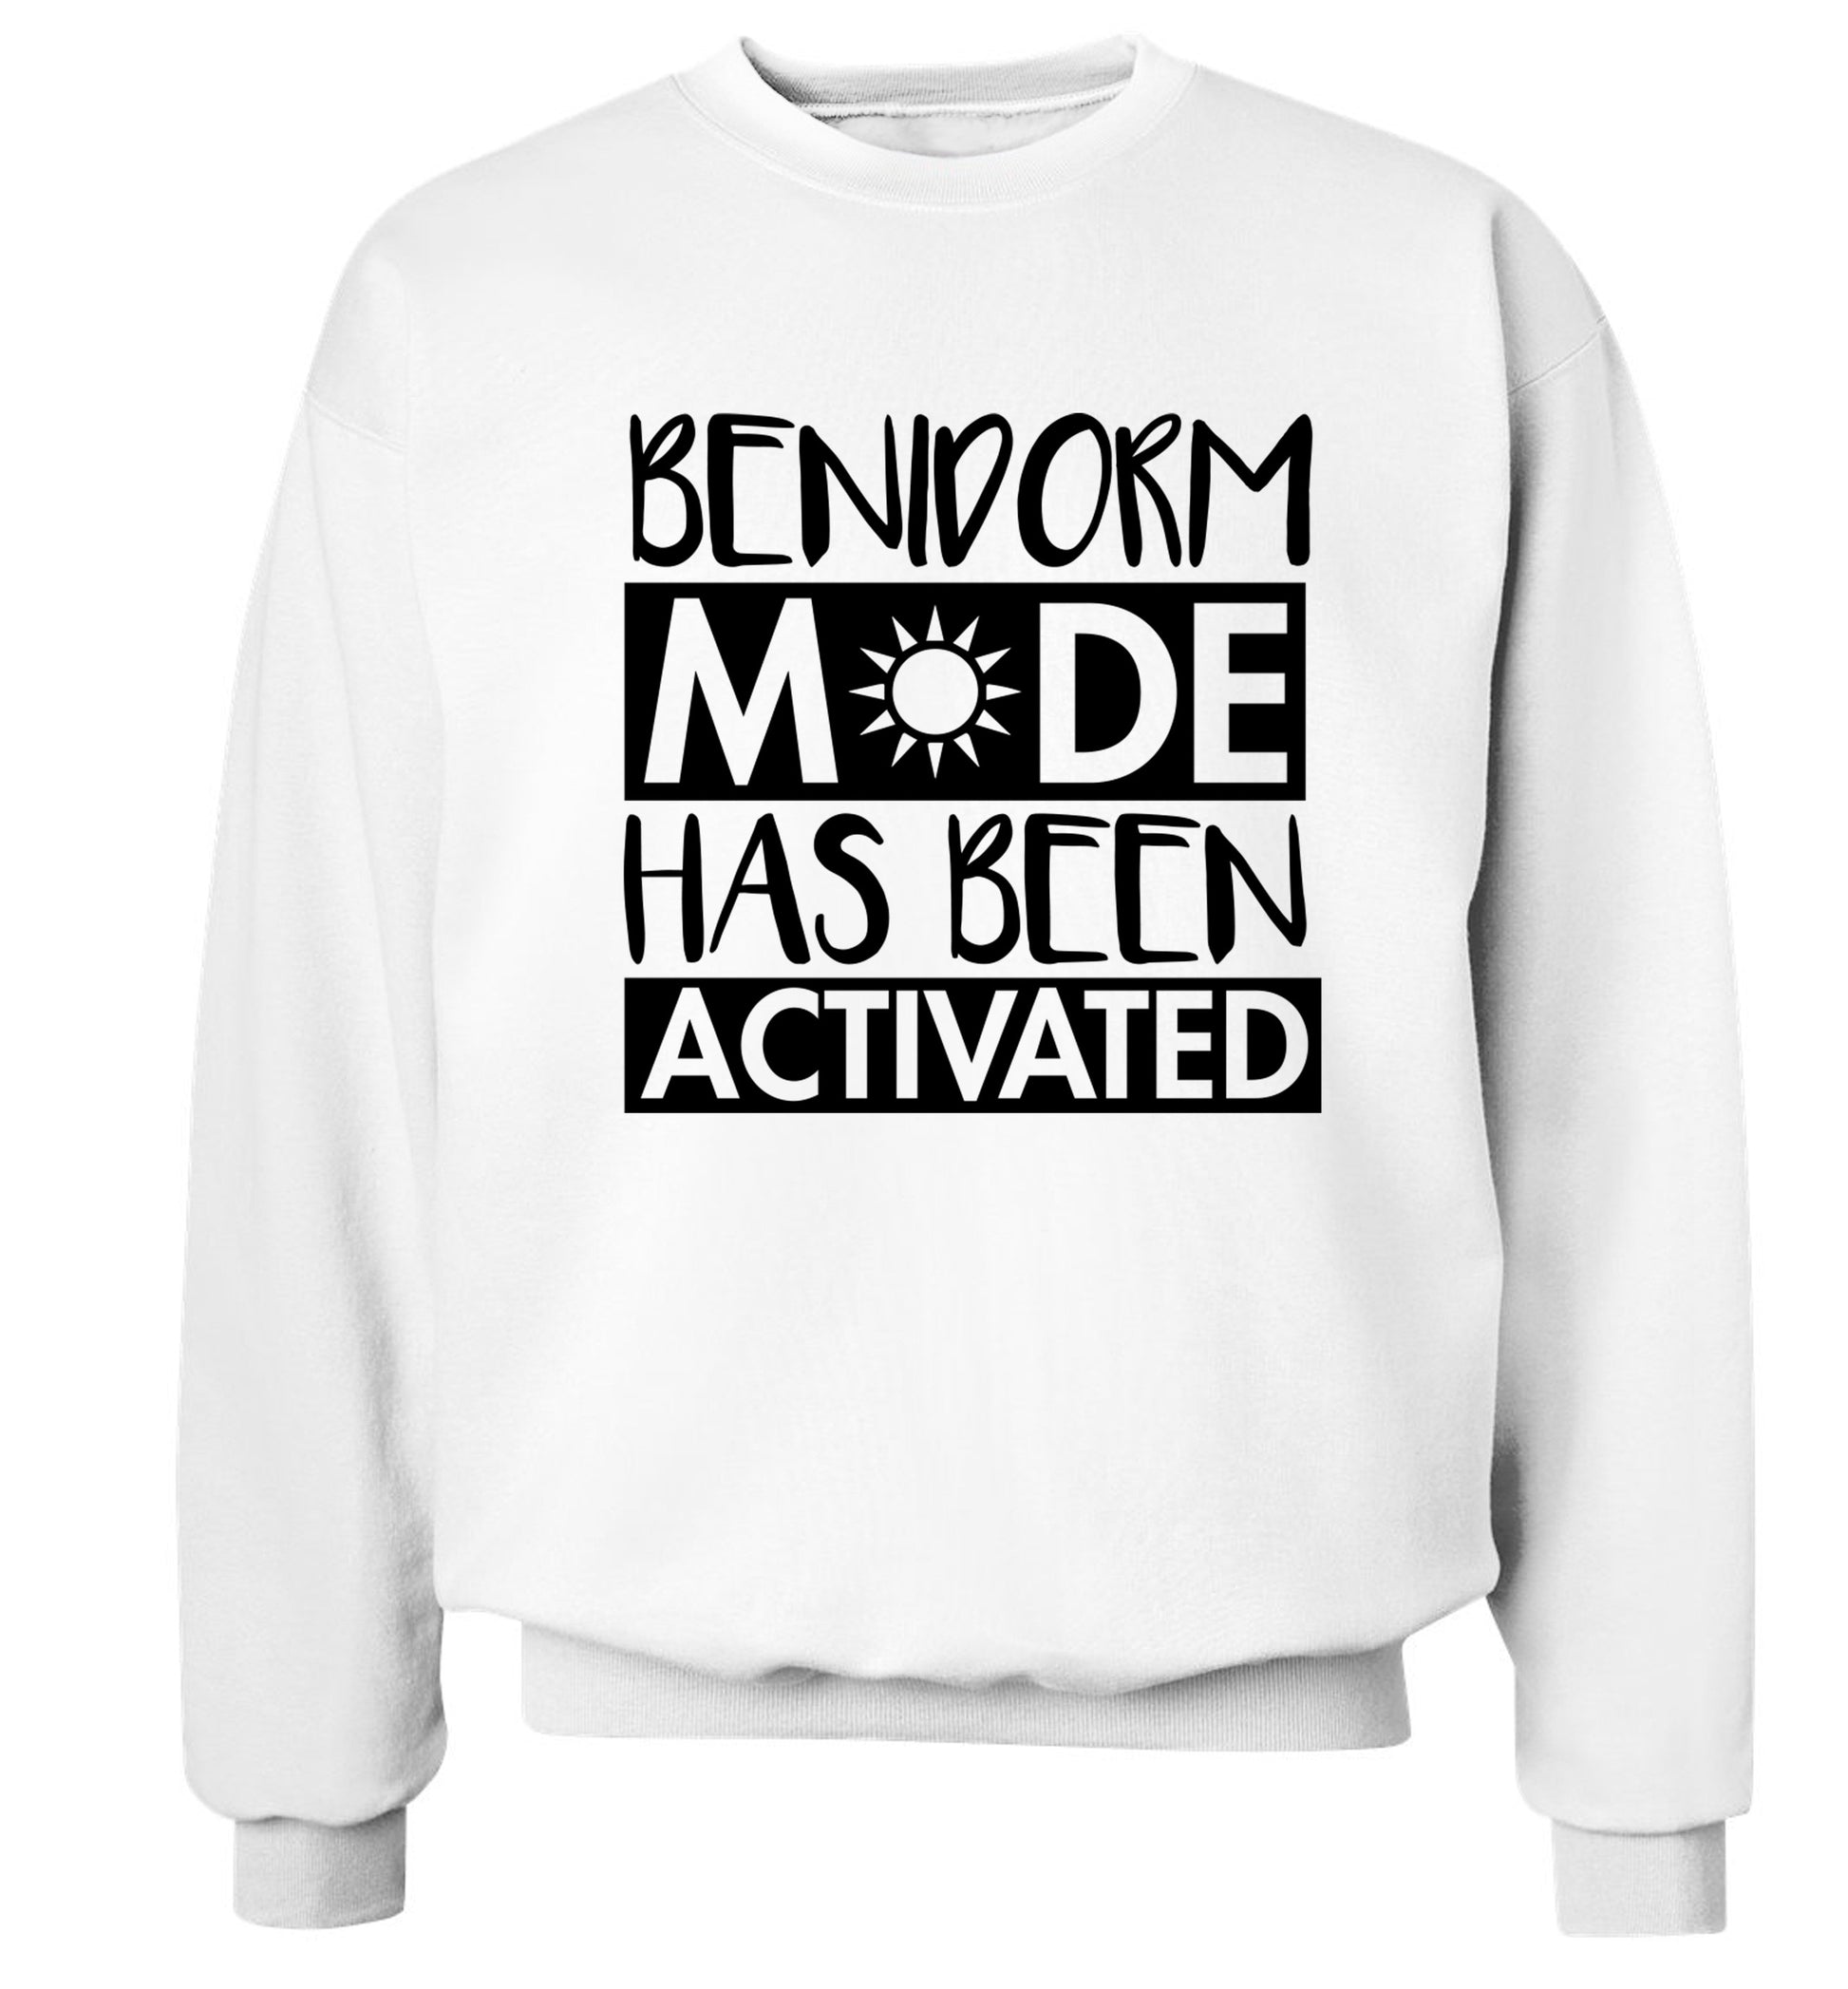 Benidorm mode has been activated Adult's unisex white Sweater 2XL